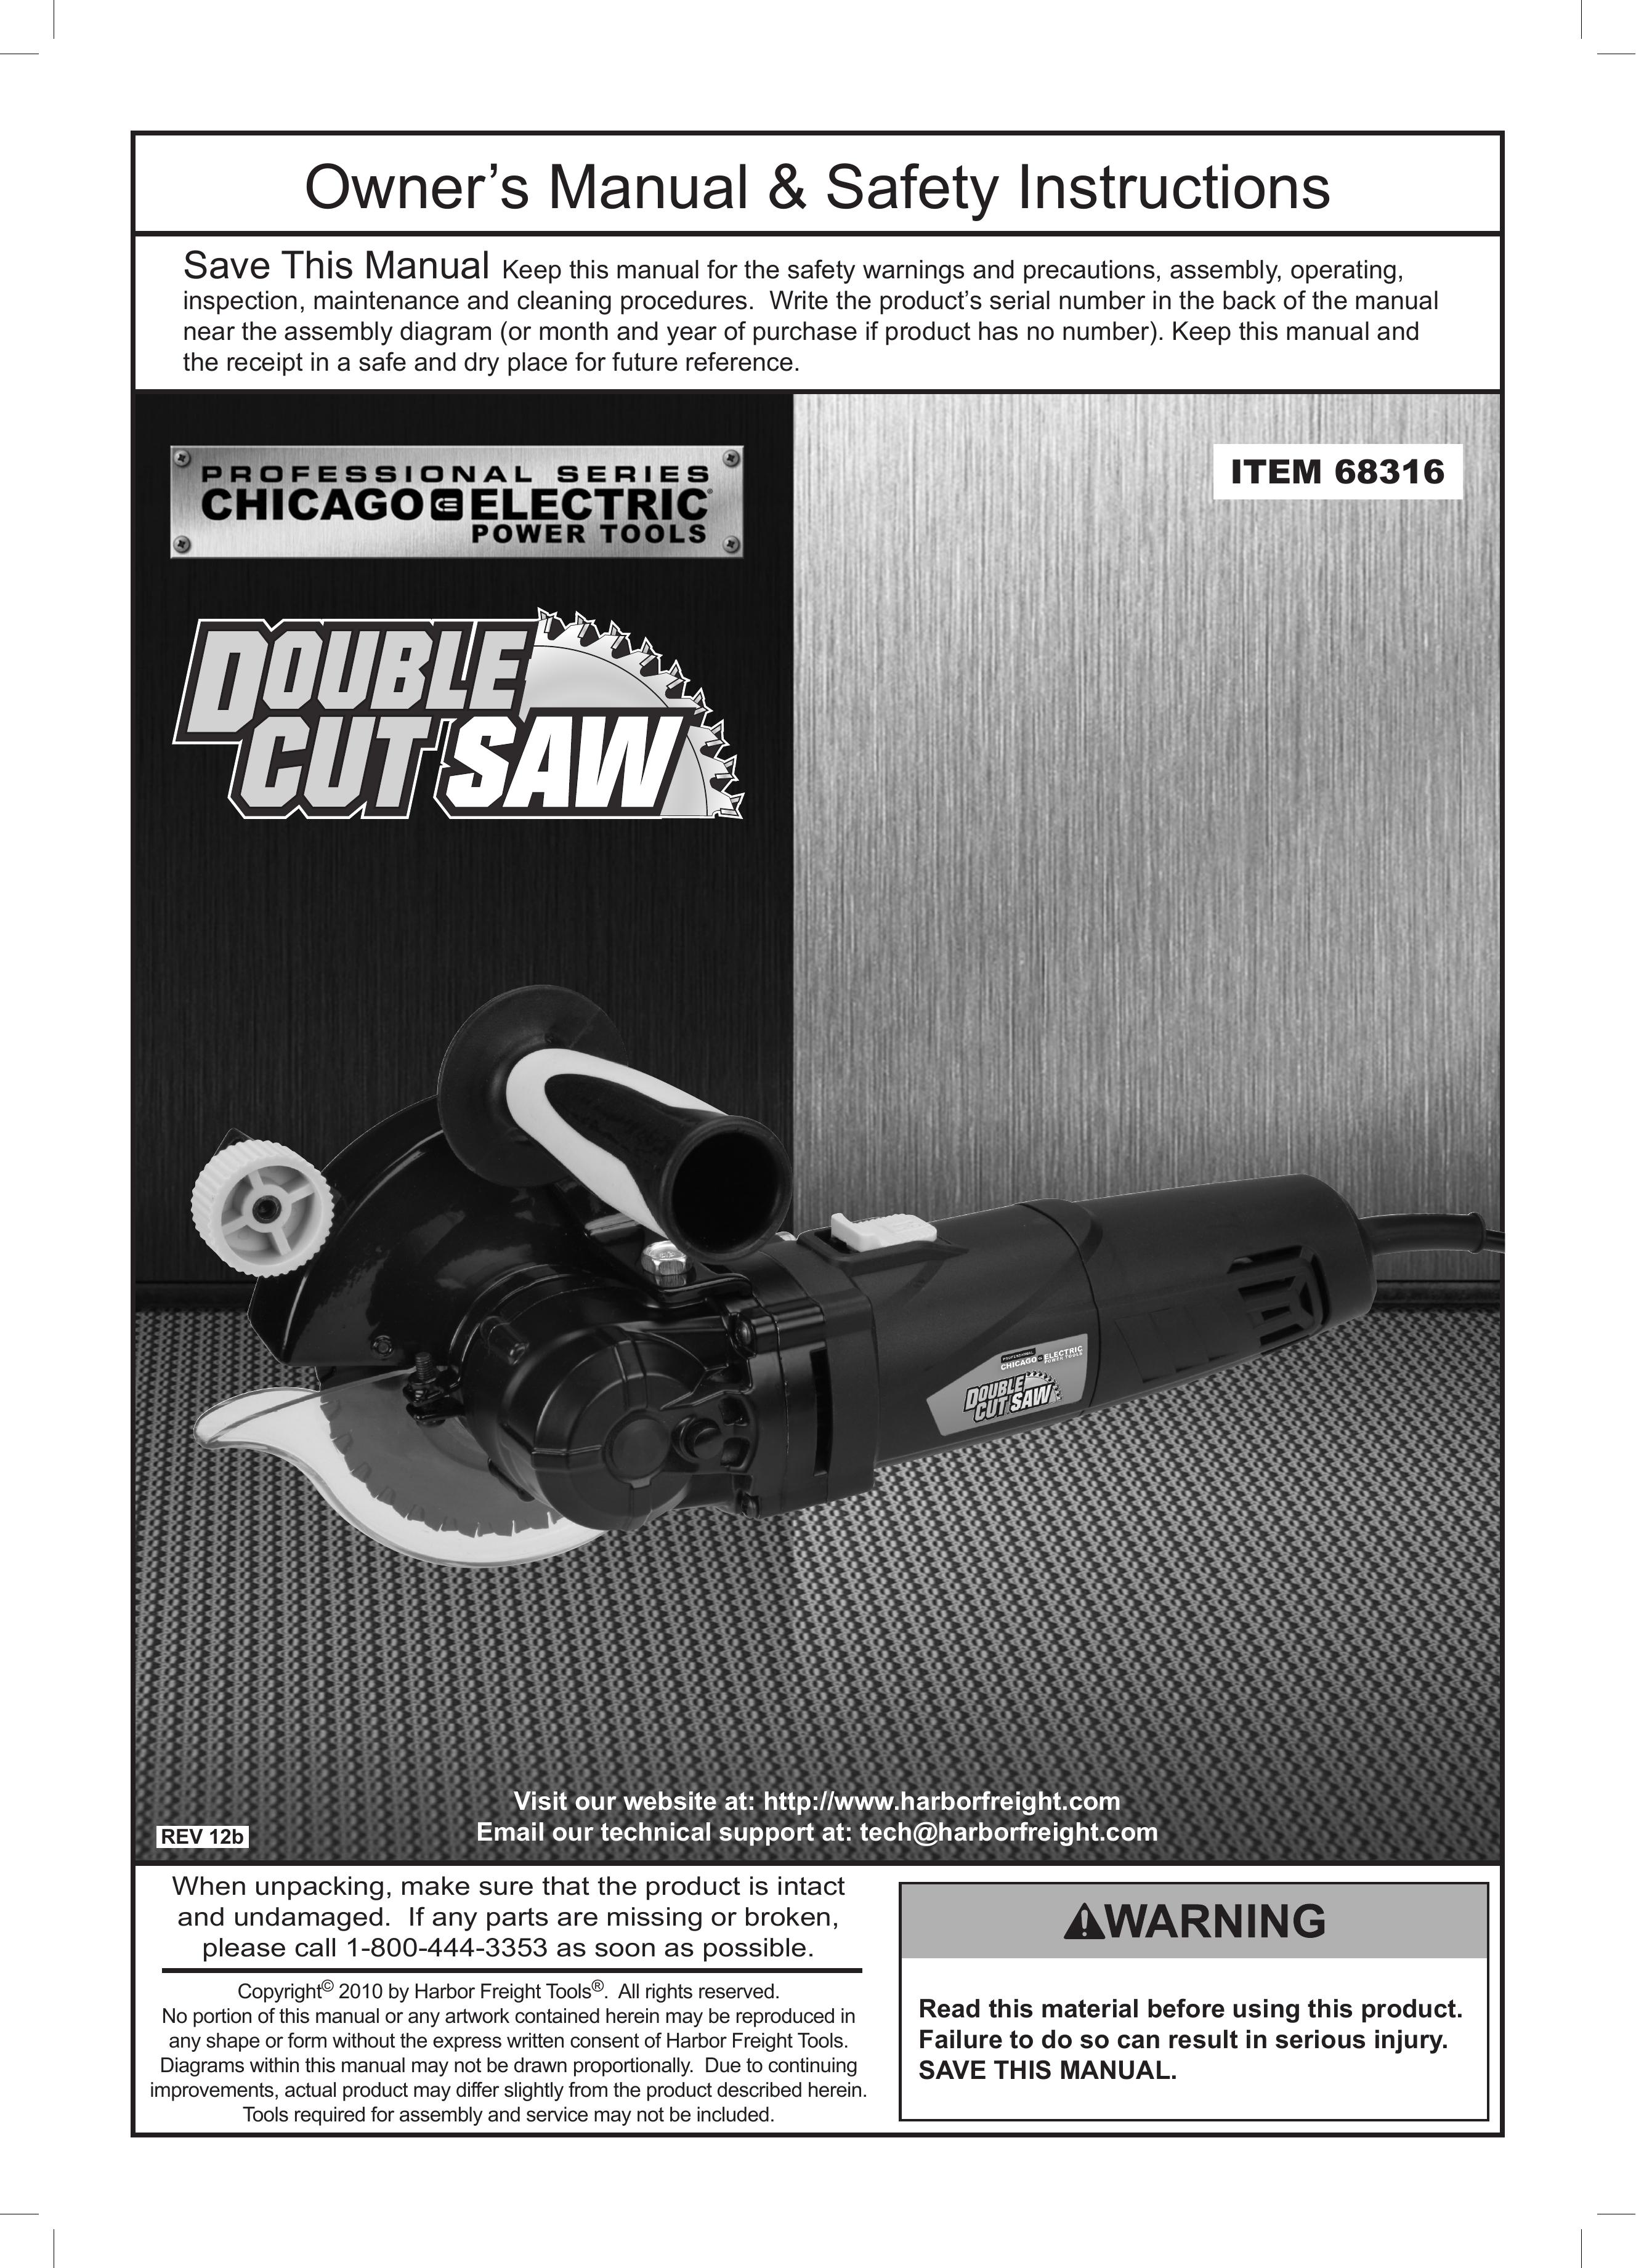 Chicago Electric 68316 Chainsaw User Manual